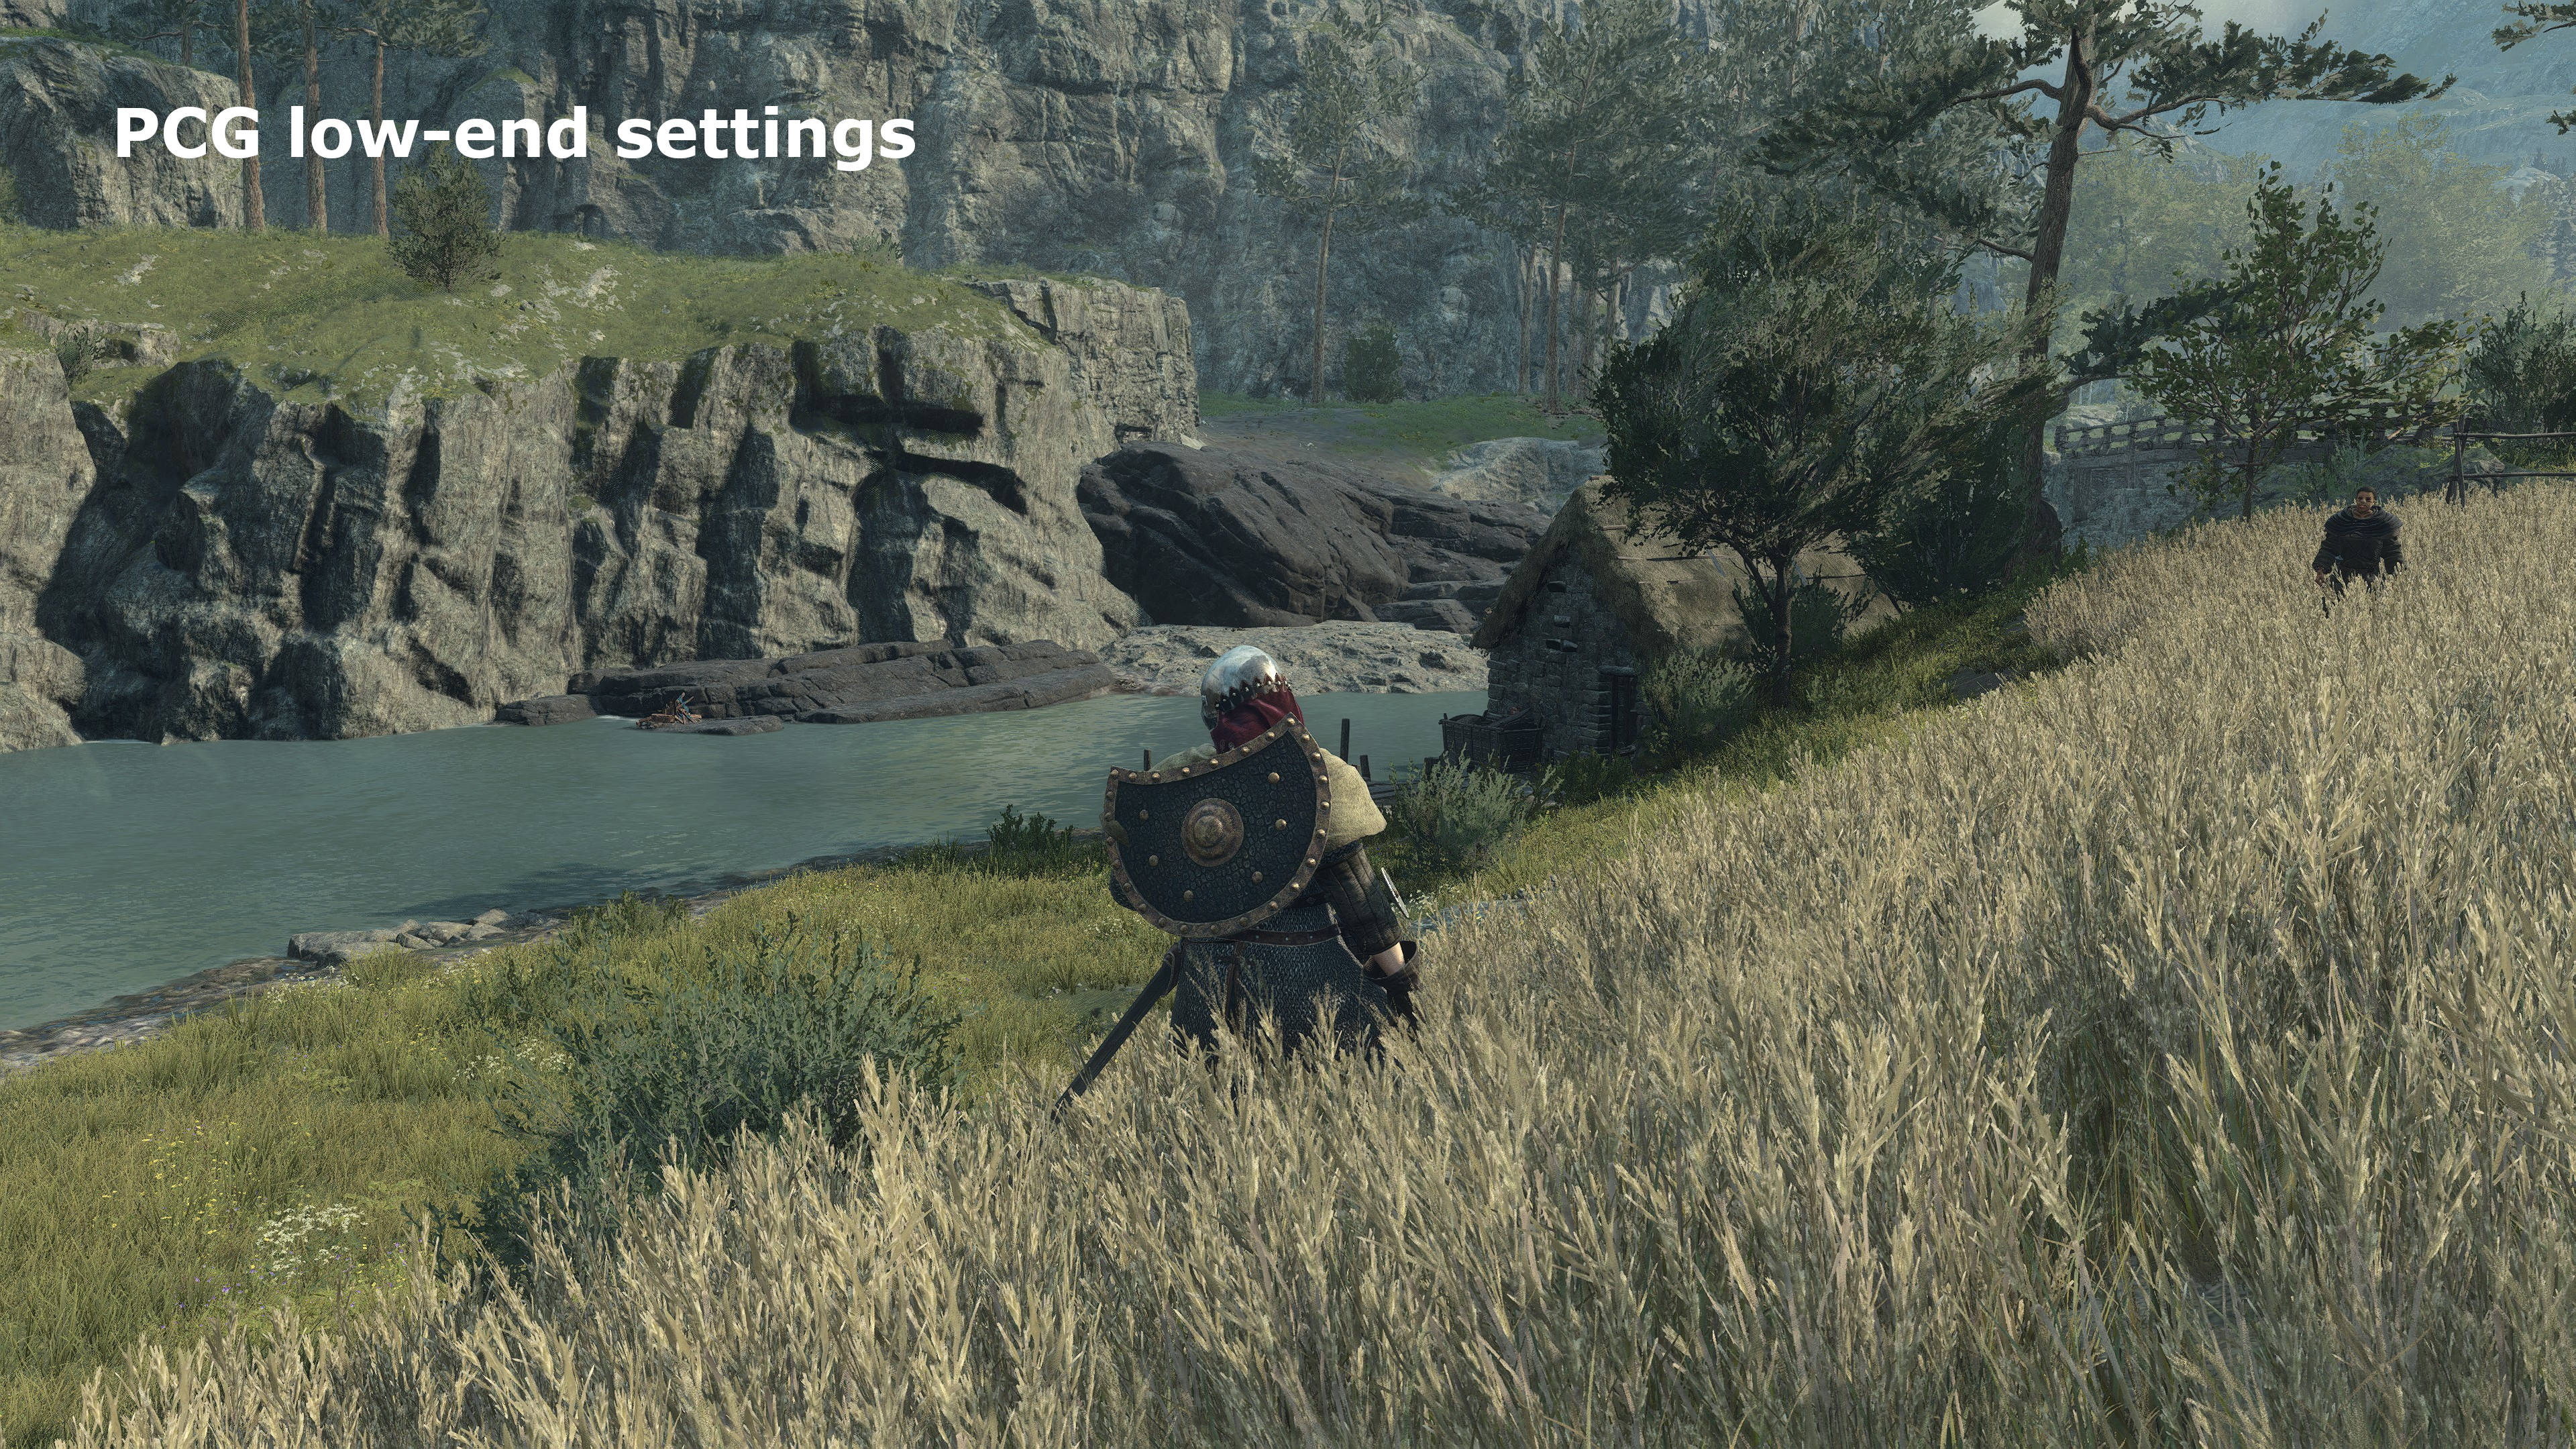 Screenshots from Dragon's Dogma 2 highlighting the visual changes that the game's graphics settings have